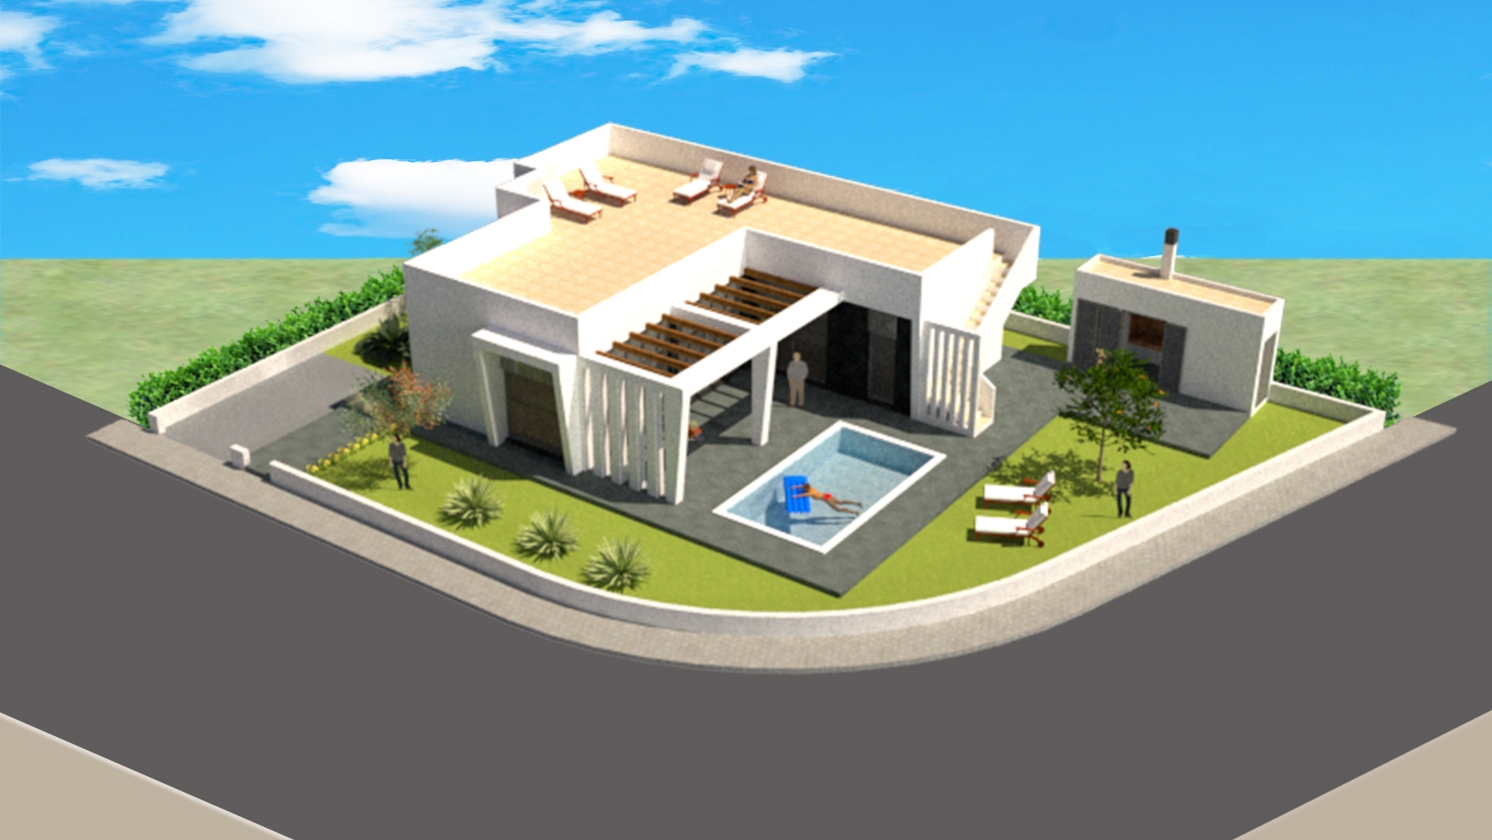 NEW PROJECT FOR SALE OF MODERN VILLAS IN POLOP